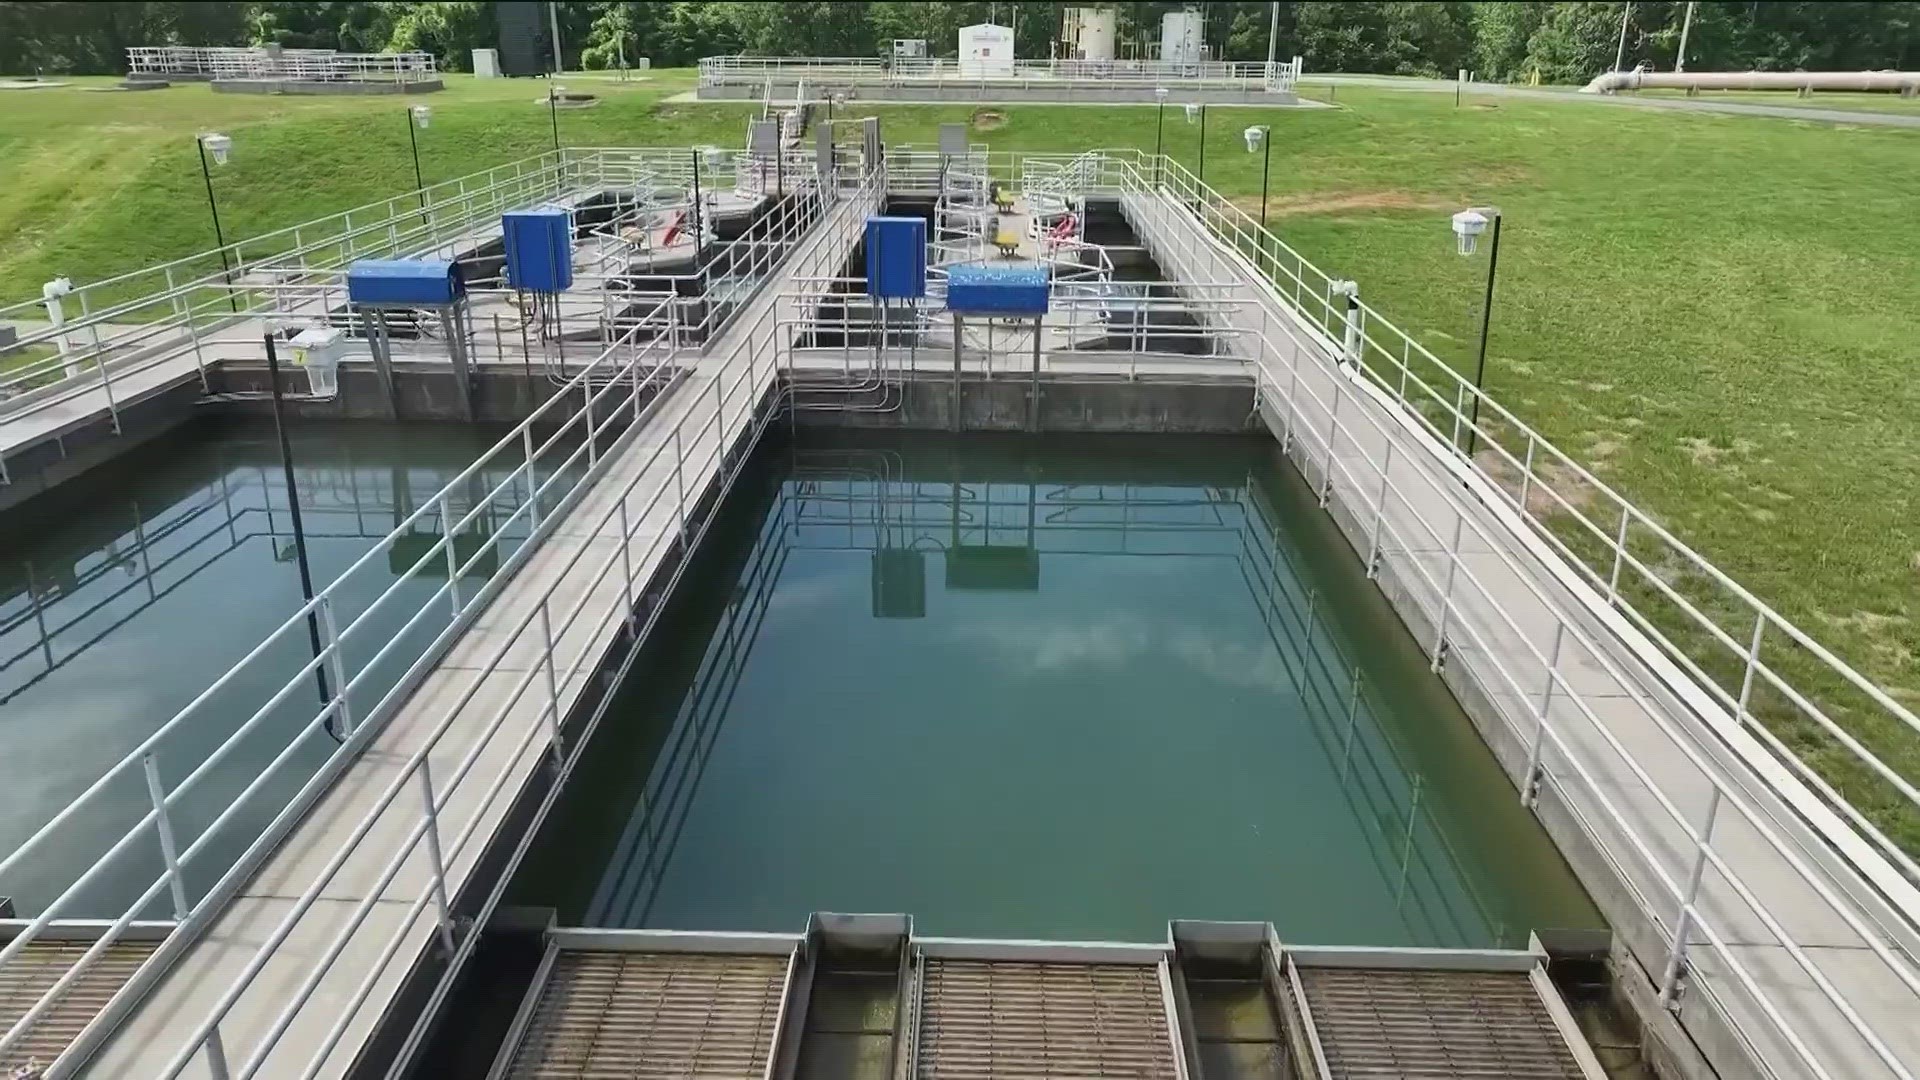 Some residents are still having to conserve water after a power outage at a water treatment facility in Forsyth County.